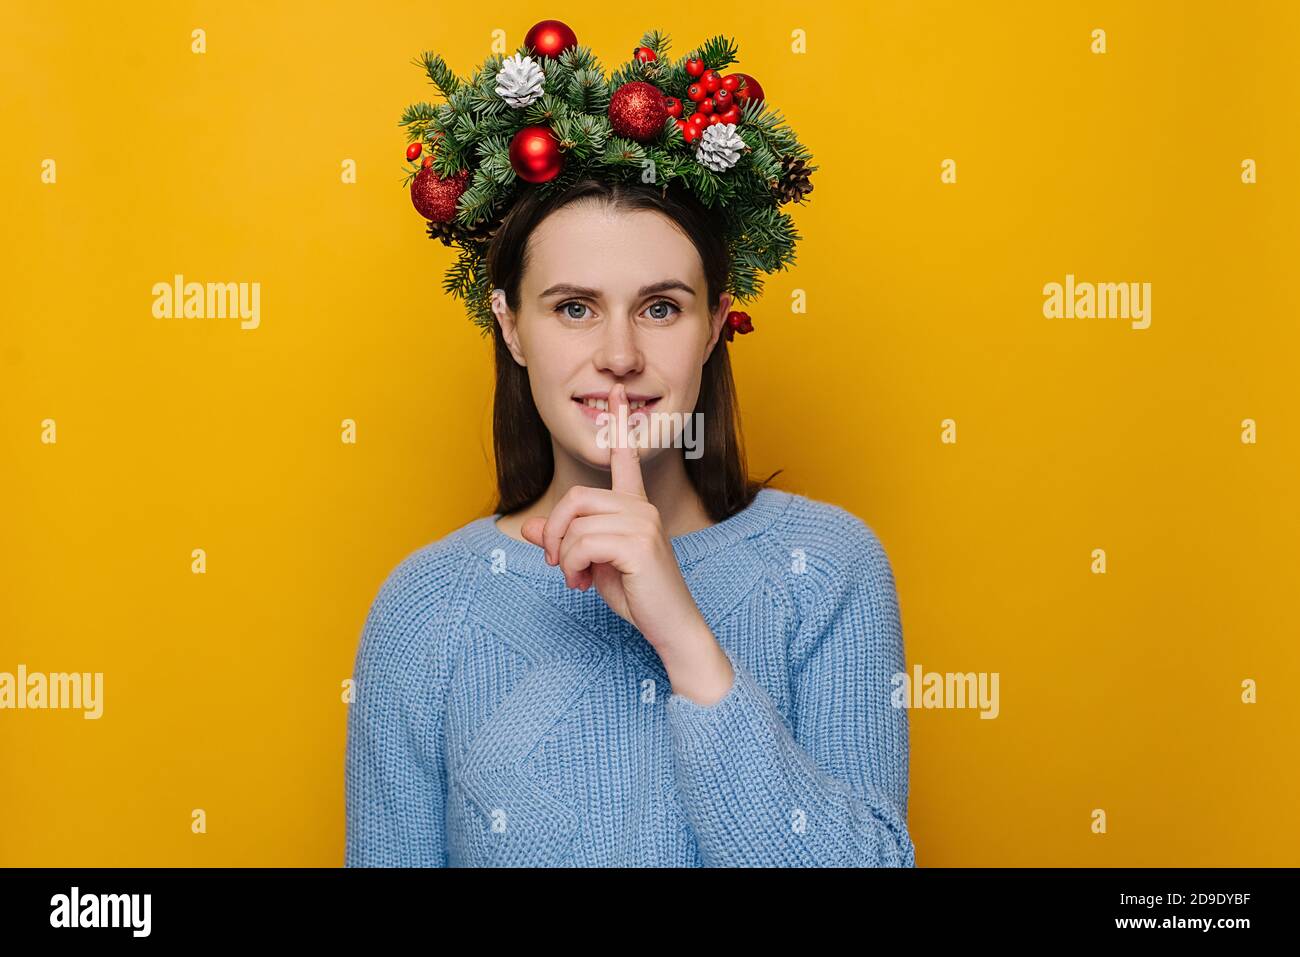 Cute young female saying hush be quiet with finger on lips shhh gesture, wears handmade wreath and blue sweater, isolated on yellow wall studio Stock Photo